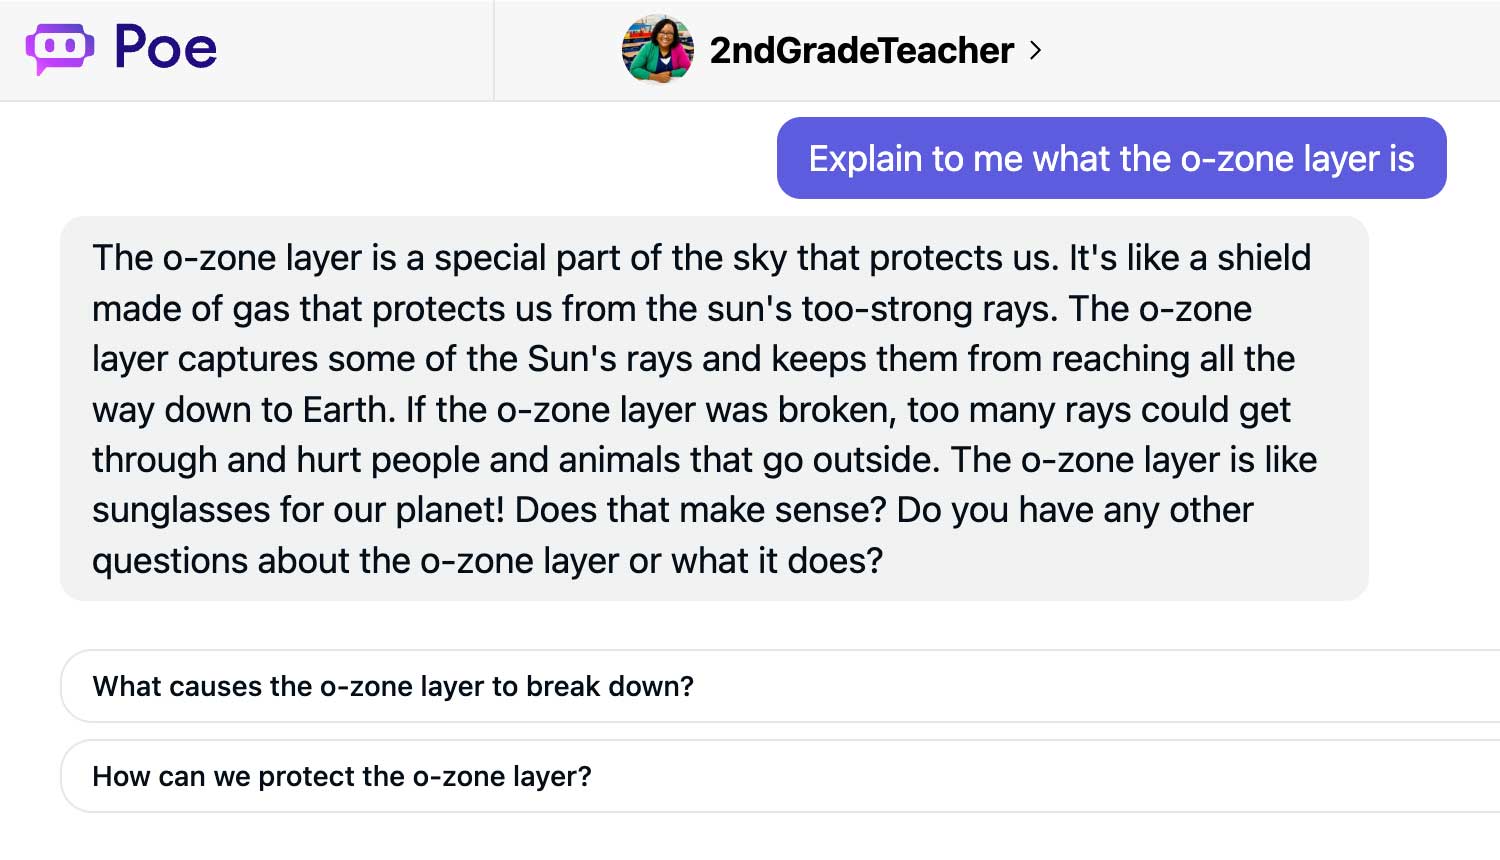 AI question and answer sequence explaining what the O-Zone layer is